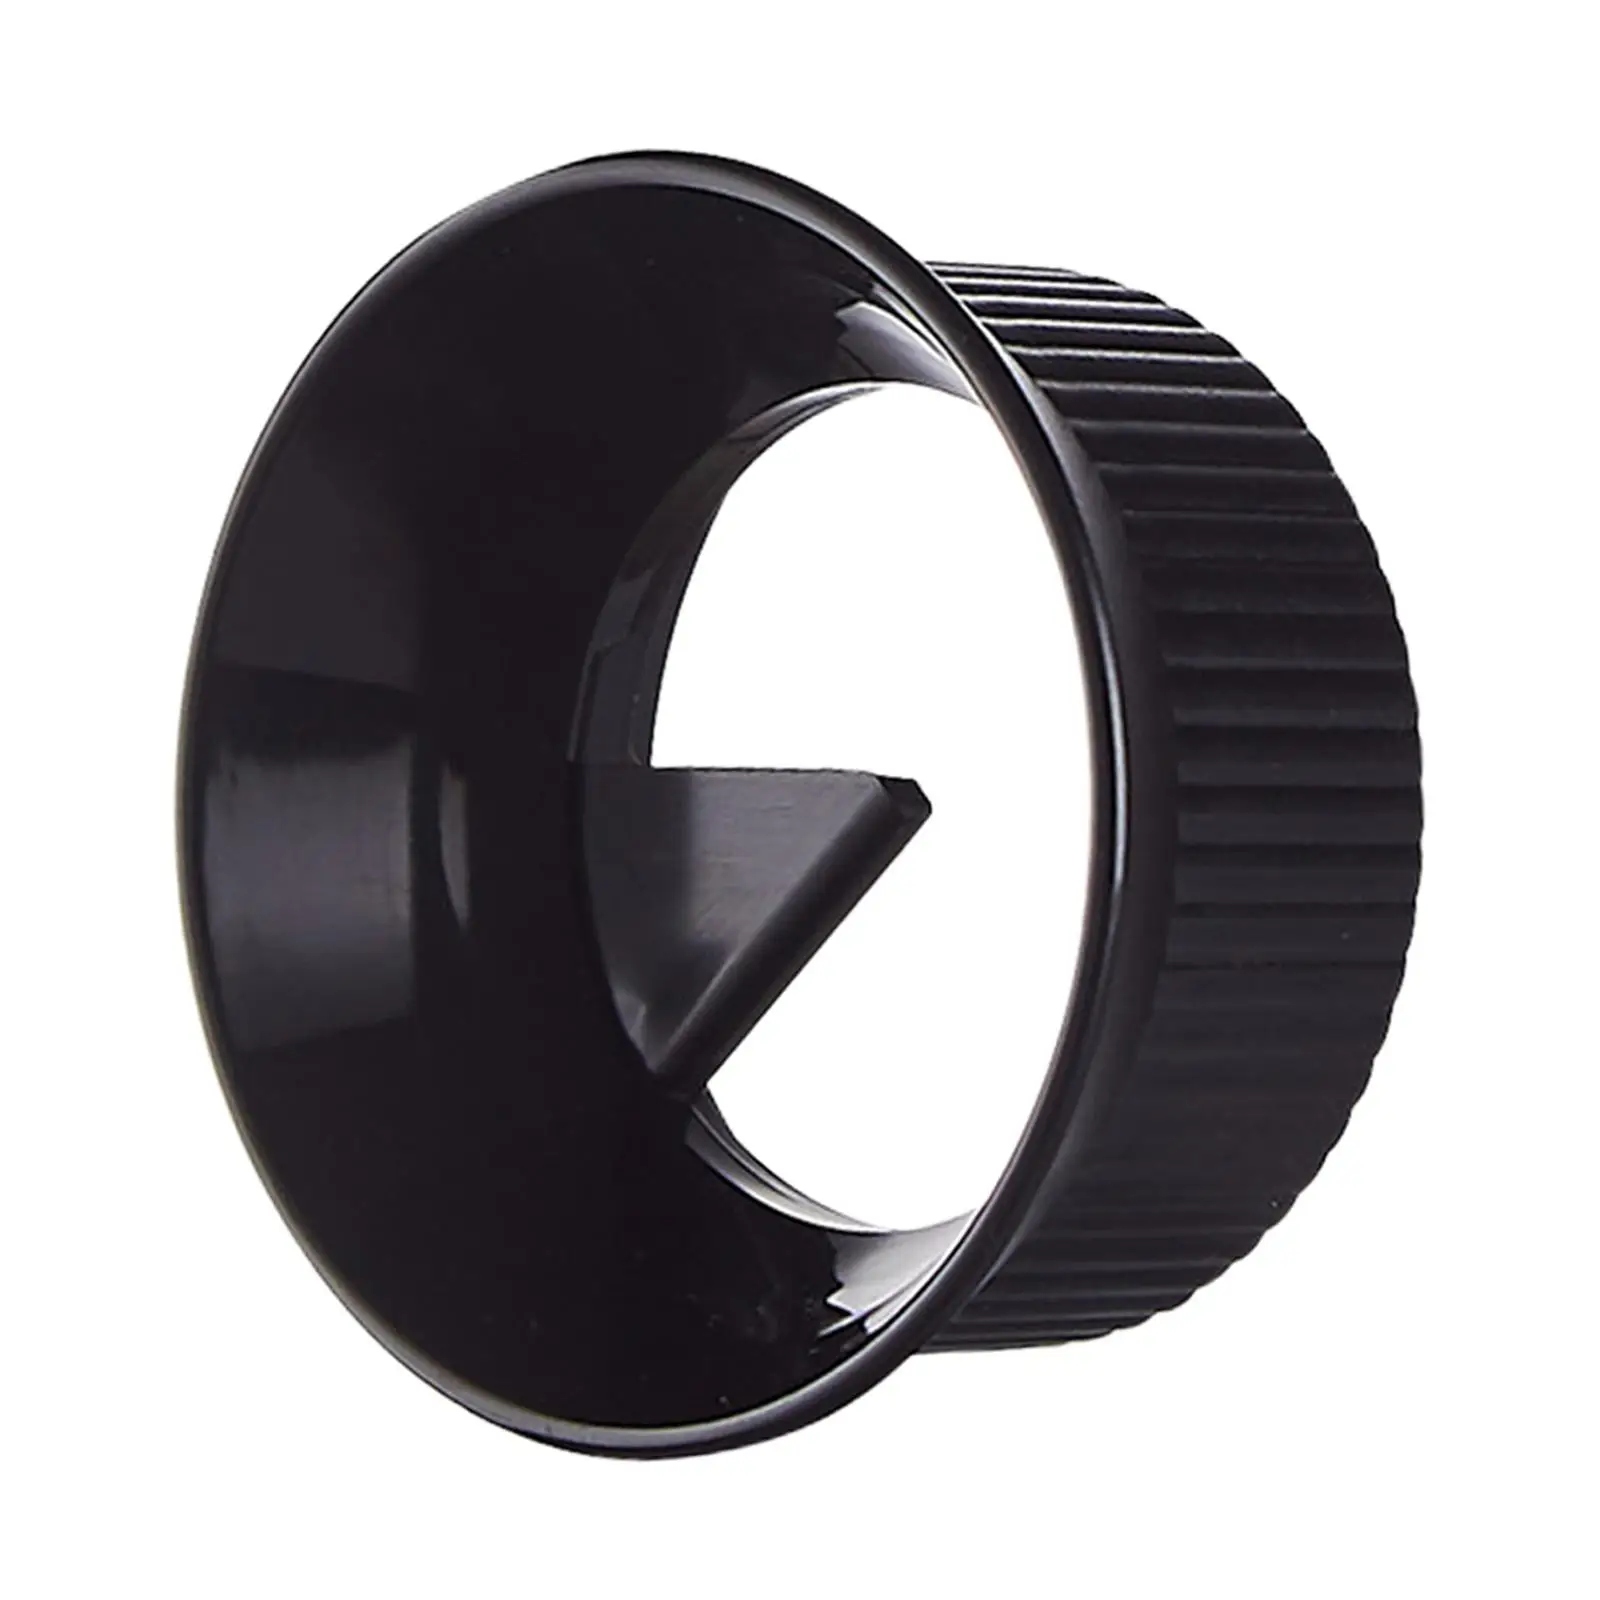 Espresso Dosing Funnel Accs Coffee Dosing Ring for Household Coffee Shop Coffee Maker Coffee Distributor Handle Office